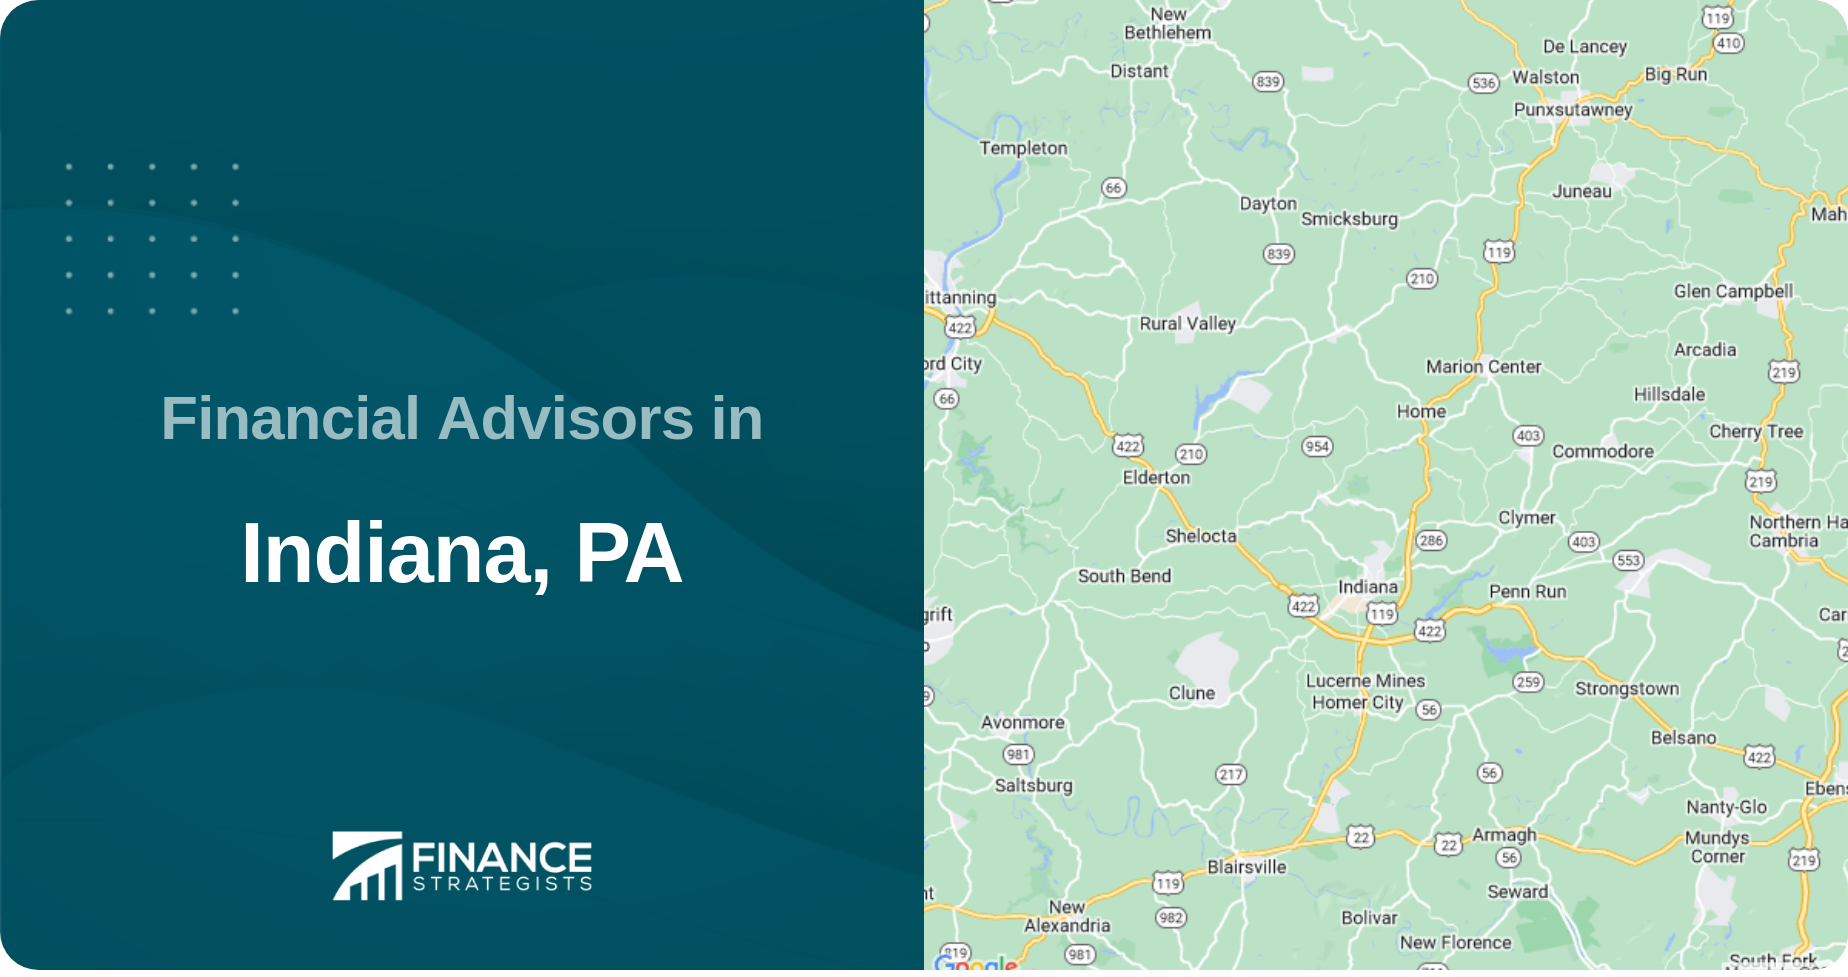 Financial Advisors in Indiana, PA